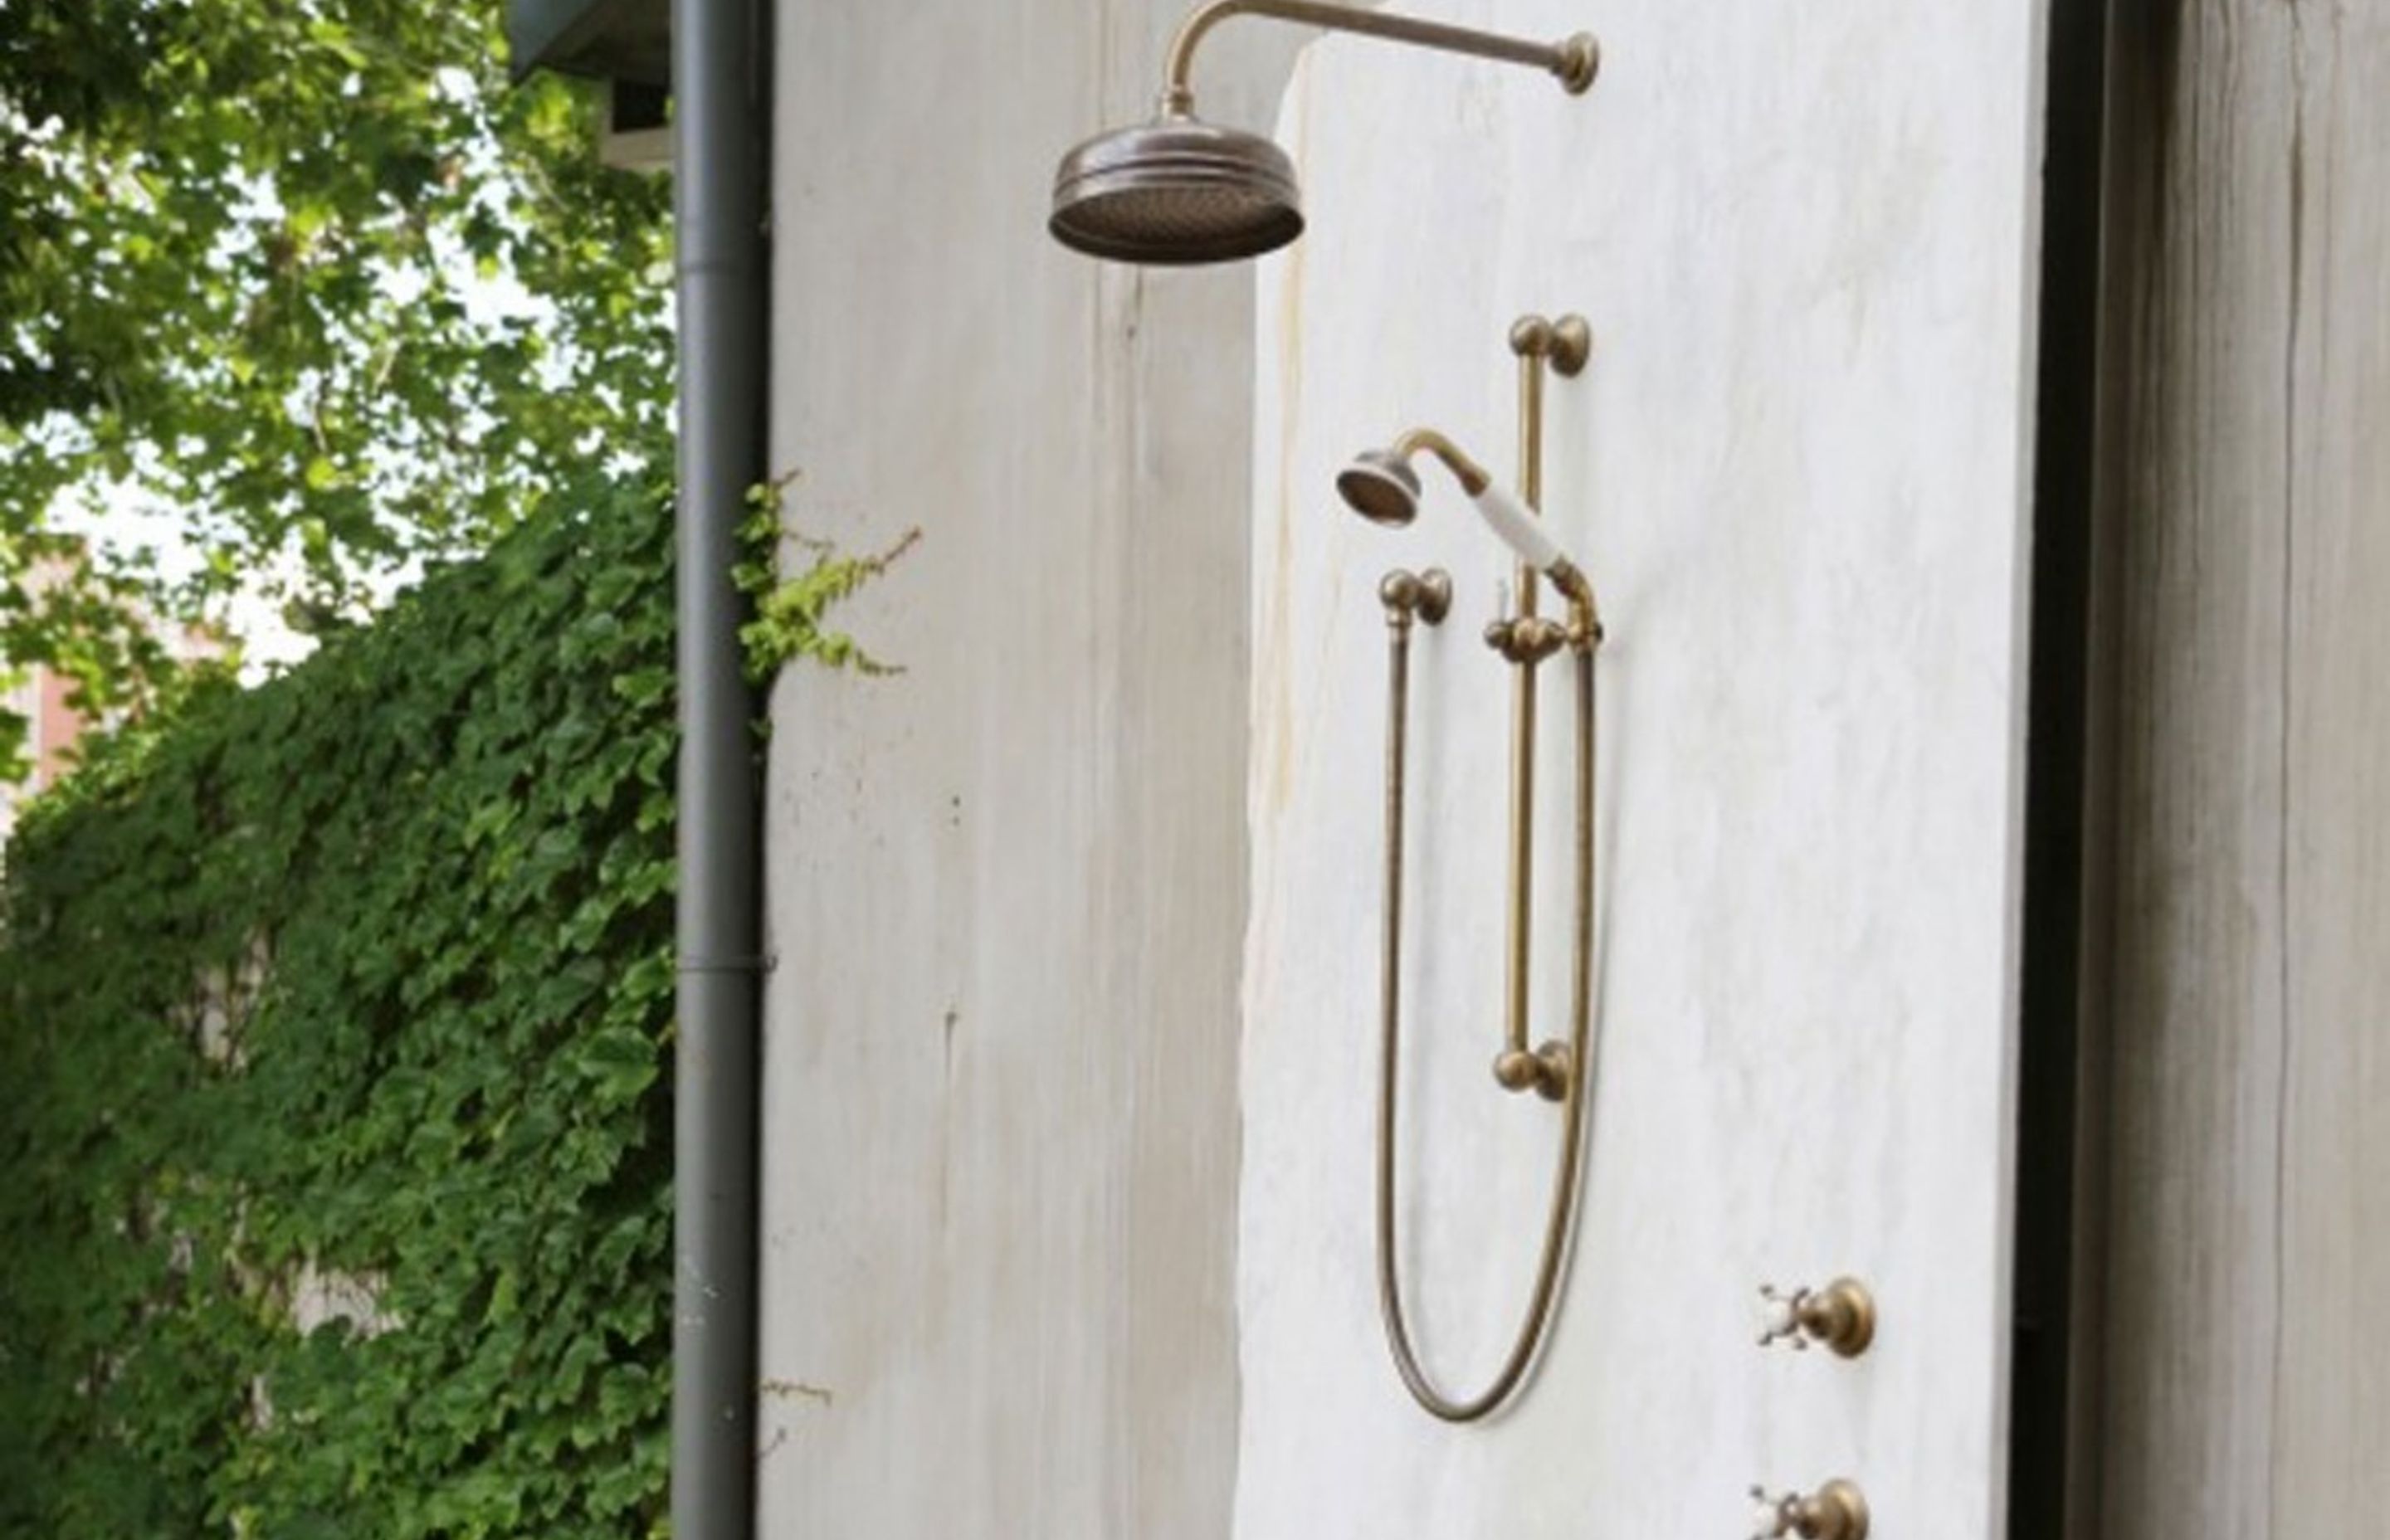 Perrin &amp; Rowe Outdoor Showers are made to withstand salt and sun